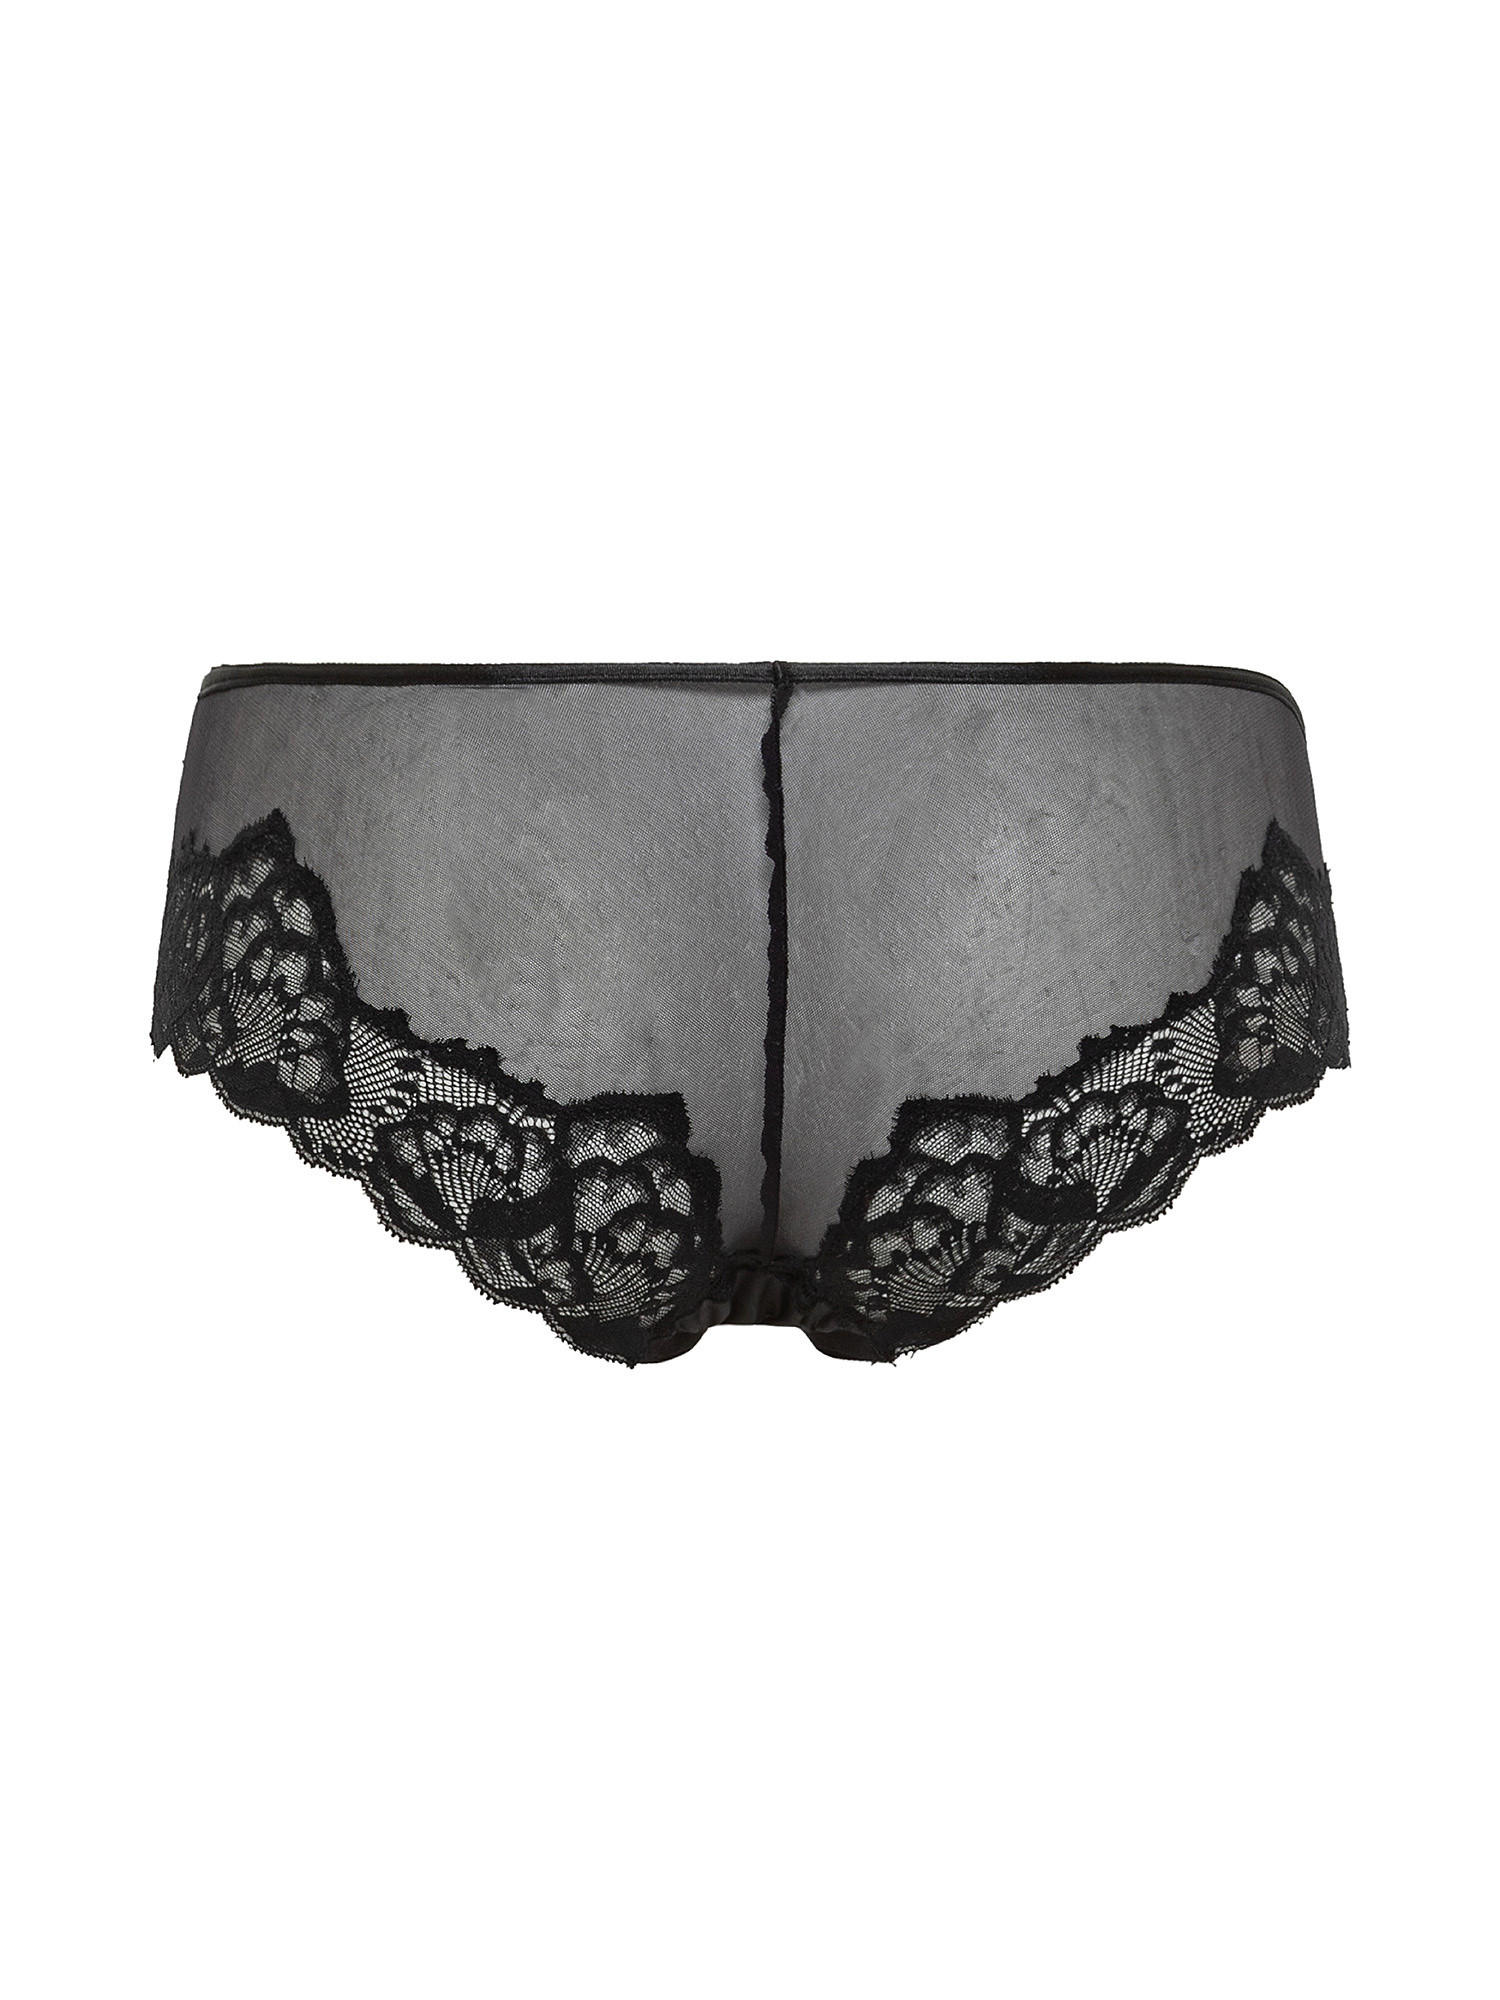 Briefs with lace inserts, Black, large image number 1